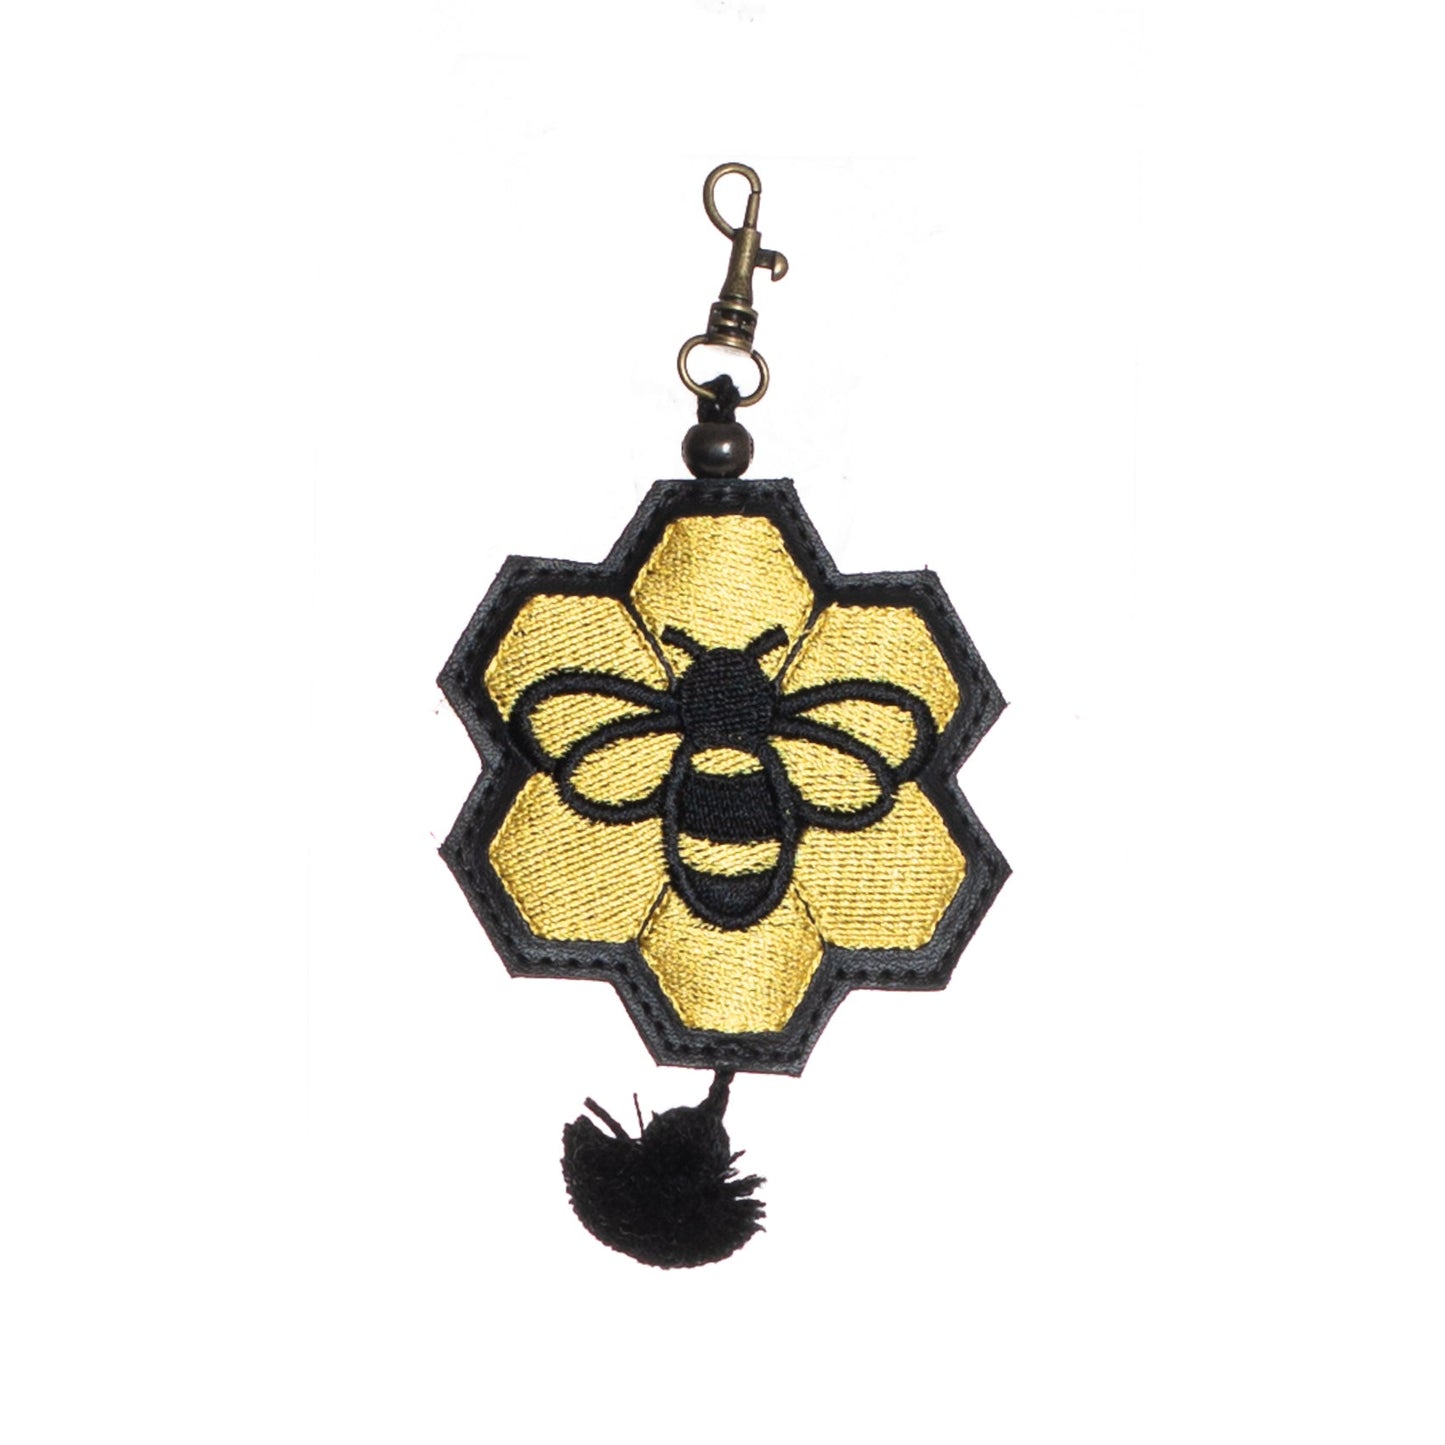 EMBROIDERED HONEYCOMB CHARM - LEATHER CHARM WITH TASSEL - BLACK LEATHER